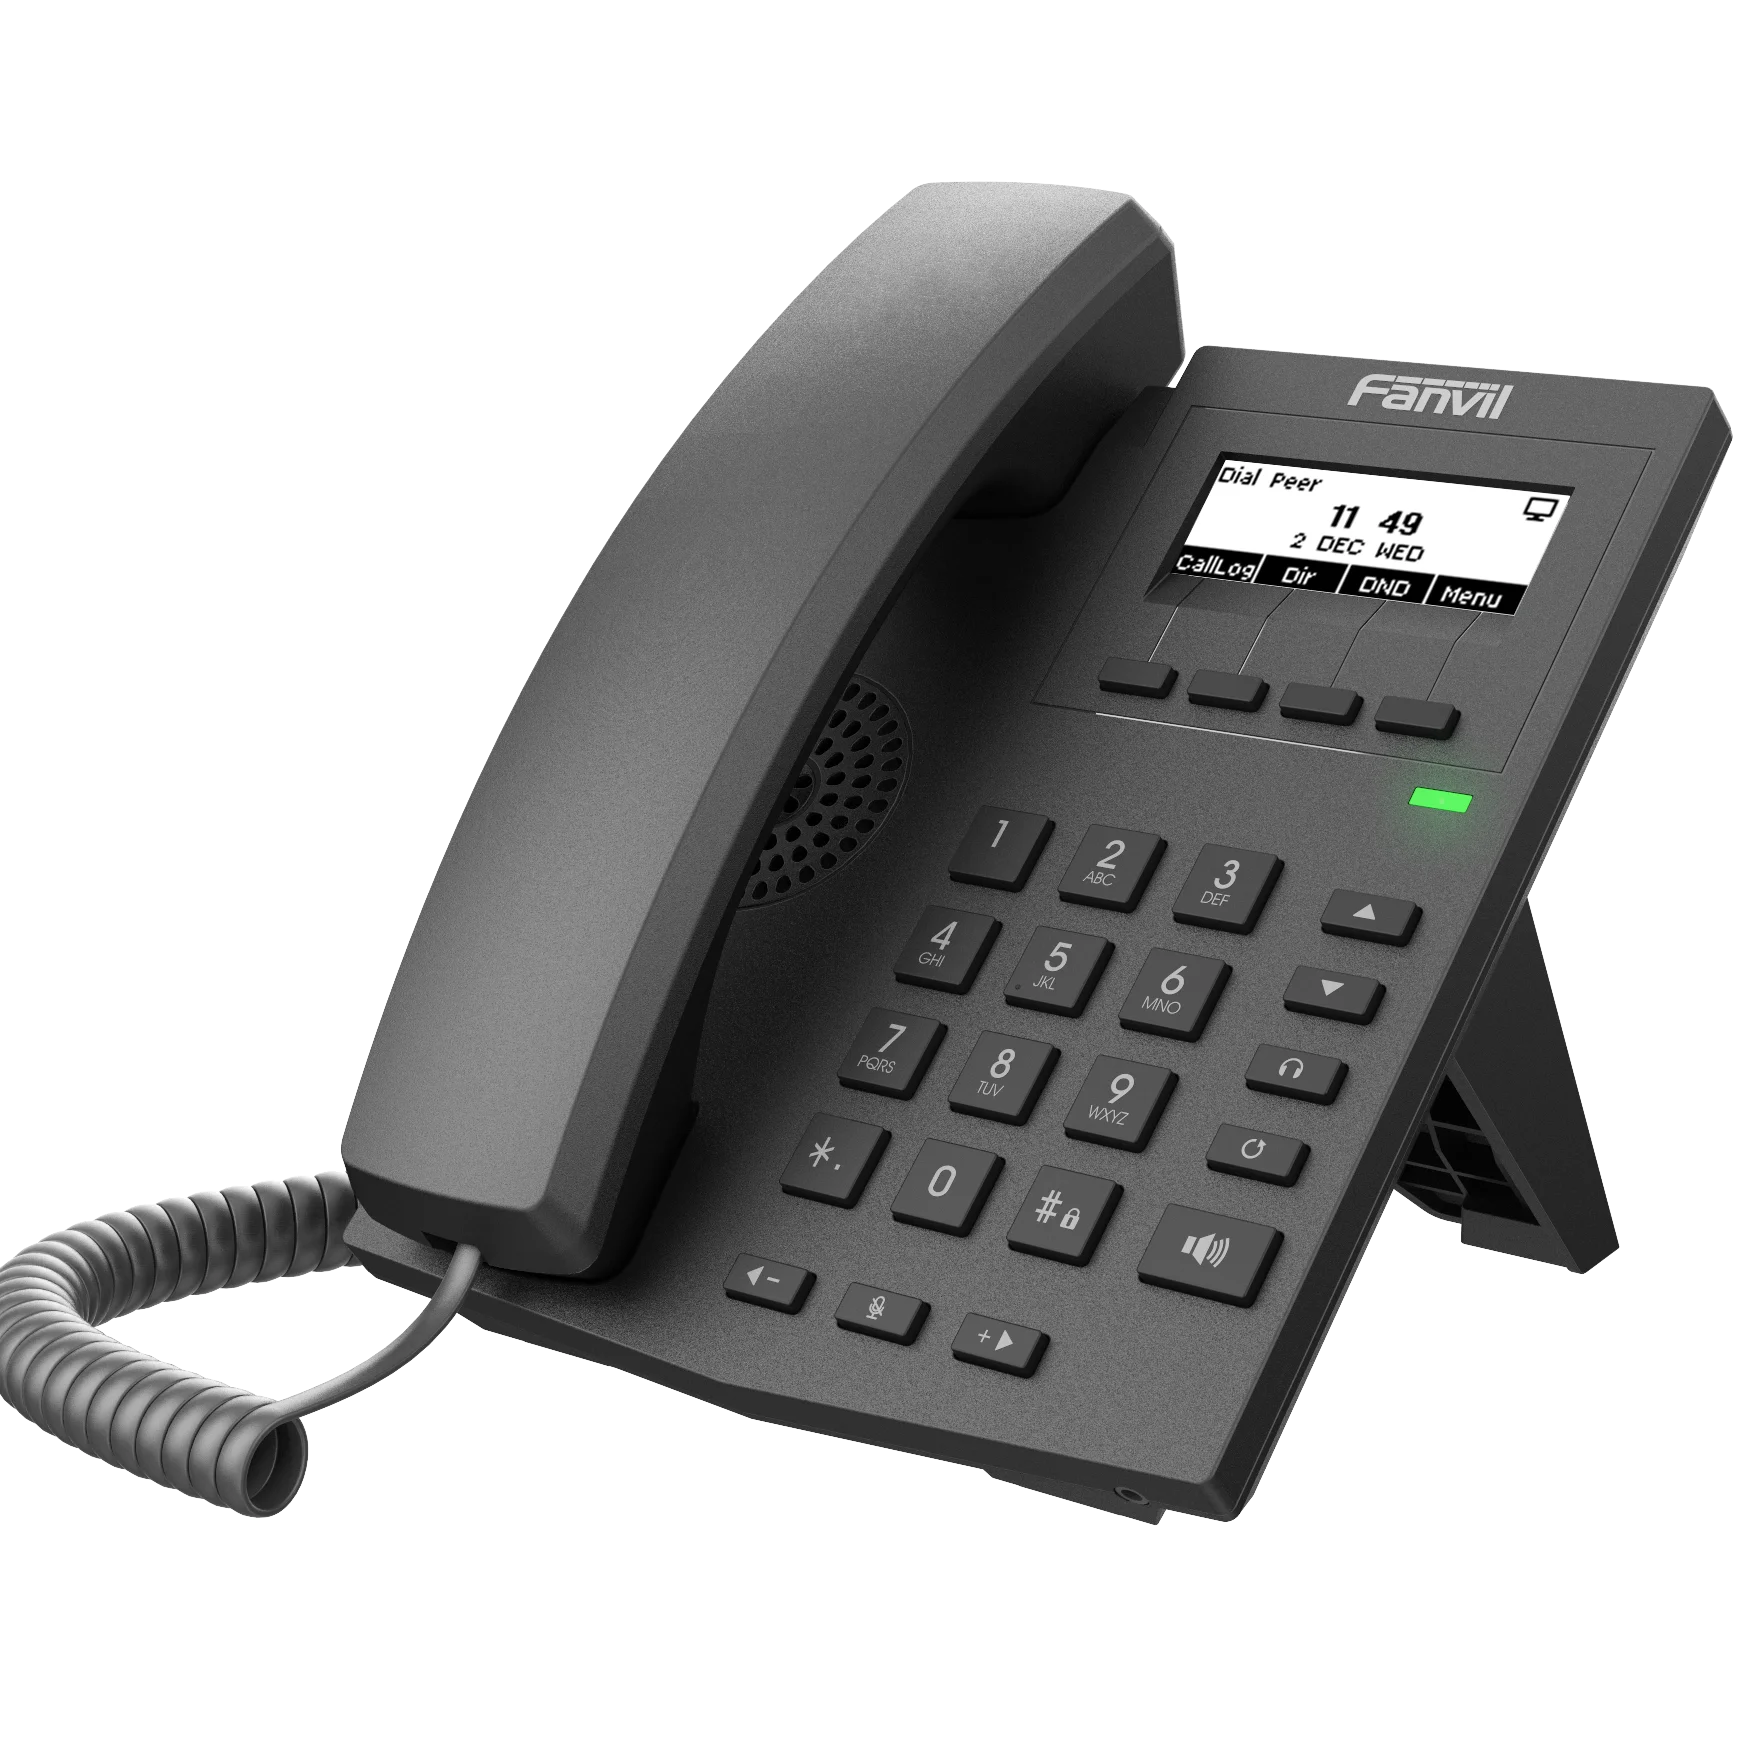 

2022 Entry-level Fanvil X1W VoIP WiFi IP Phones 2 SIP Lines Wireless IP Phone support POE 3-way Conference VoIP Products